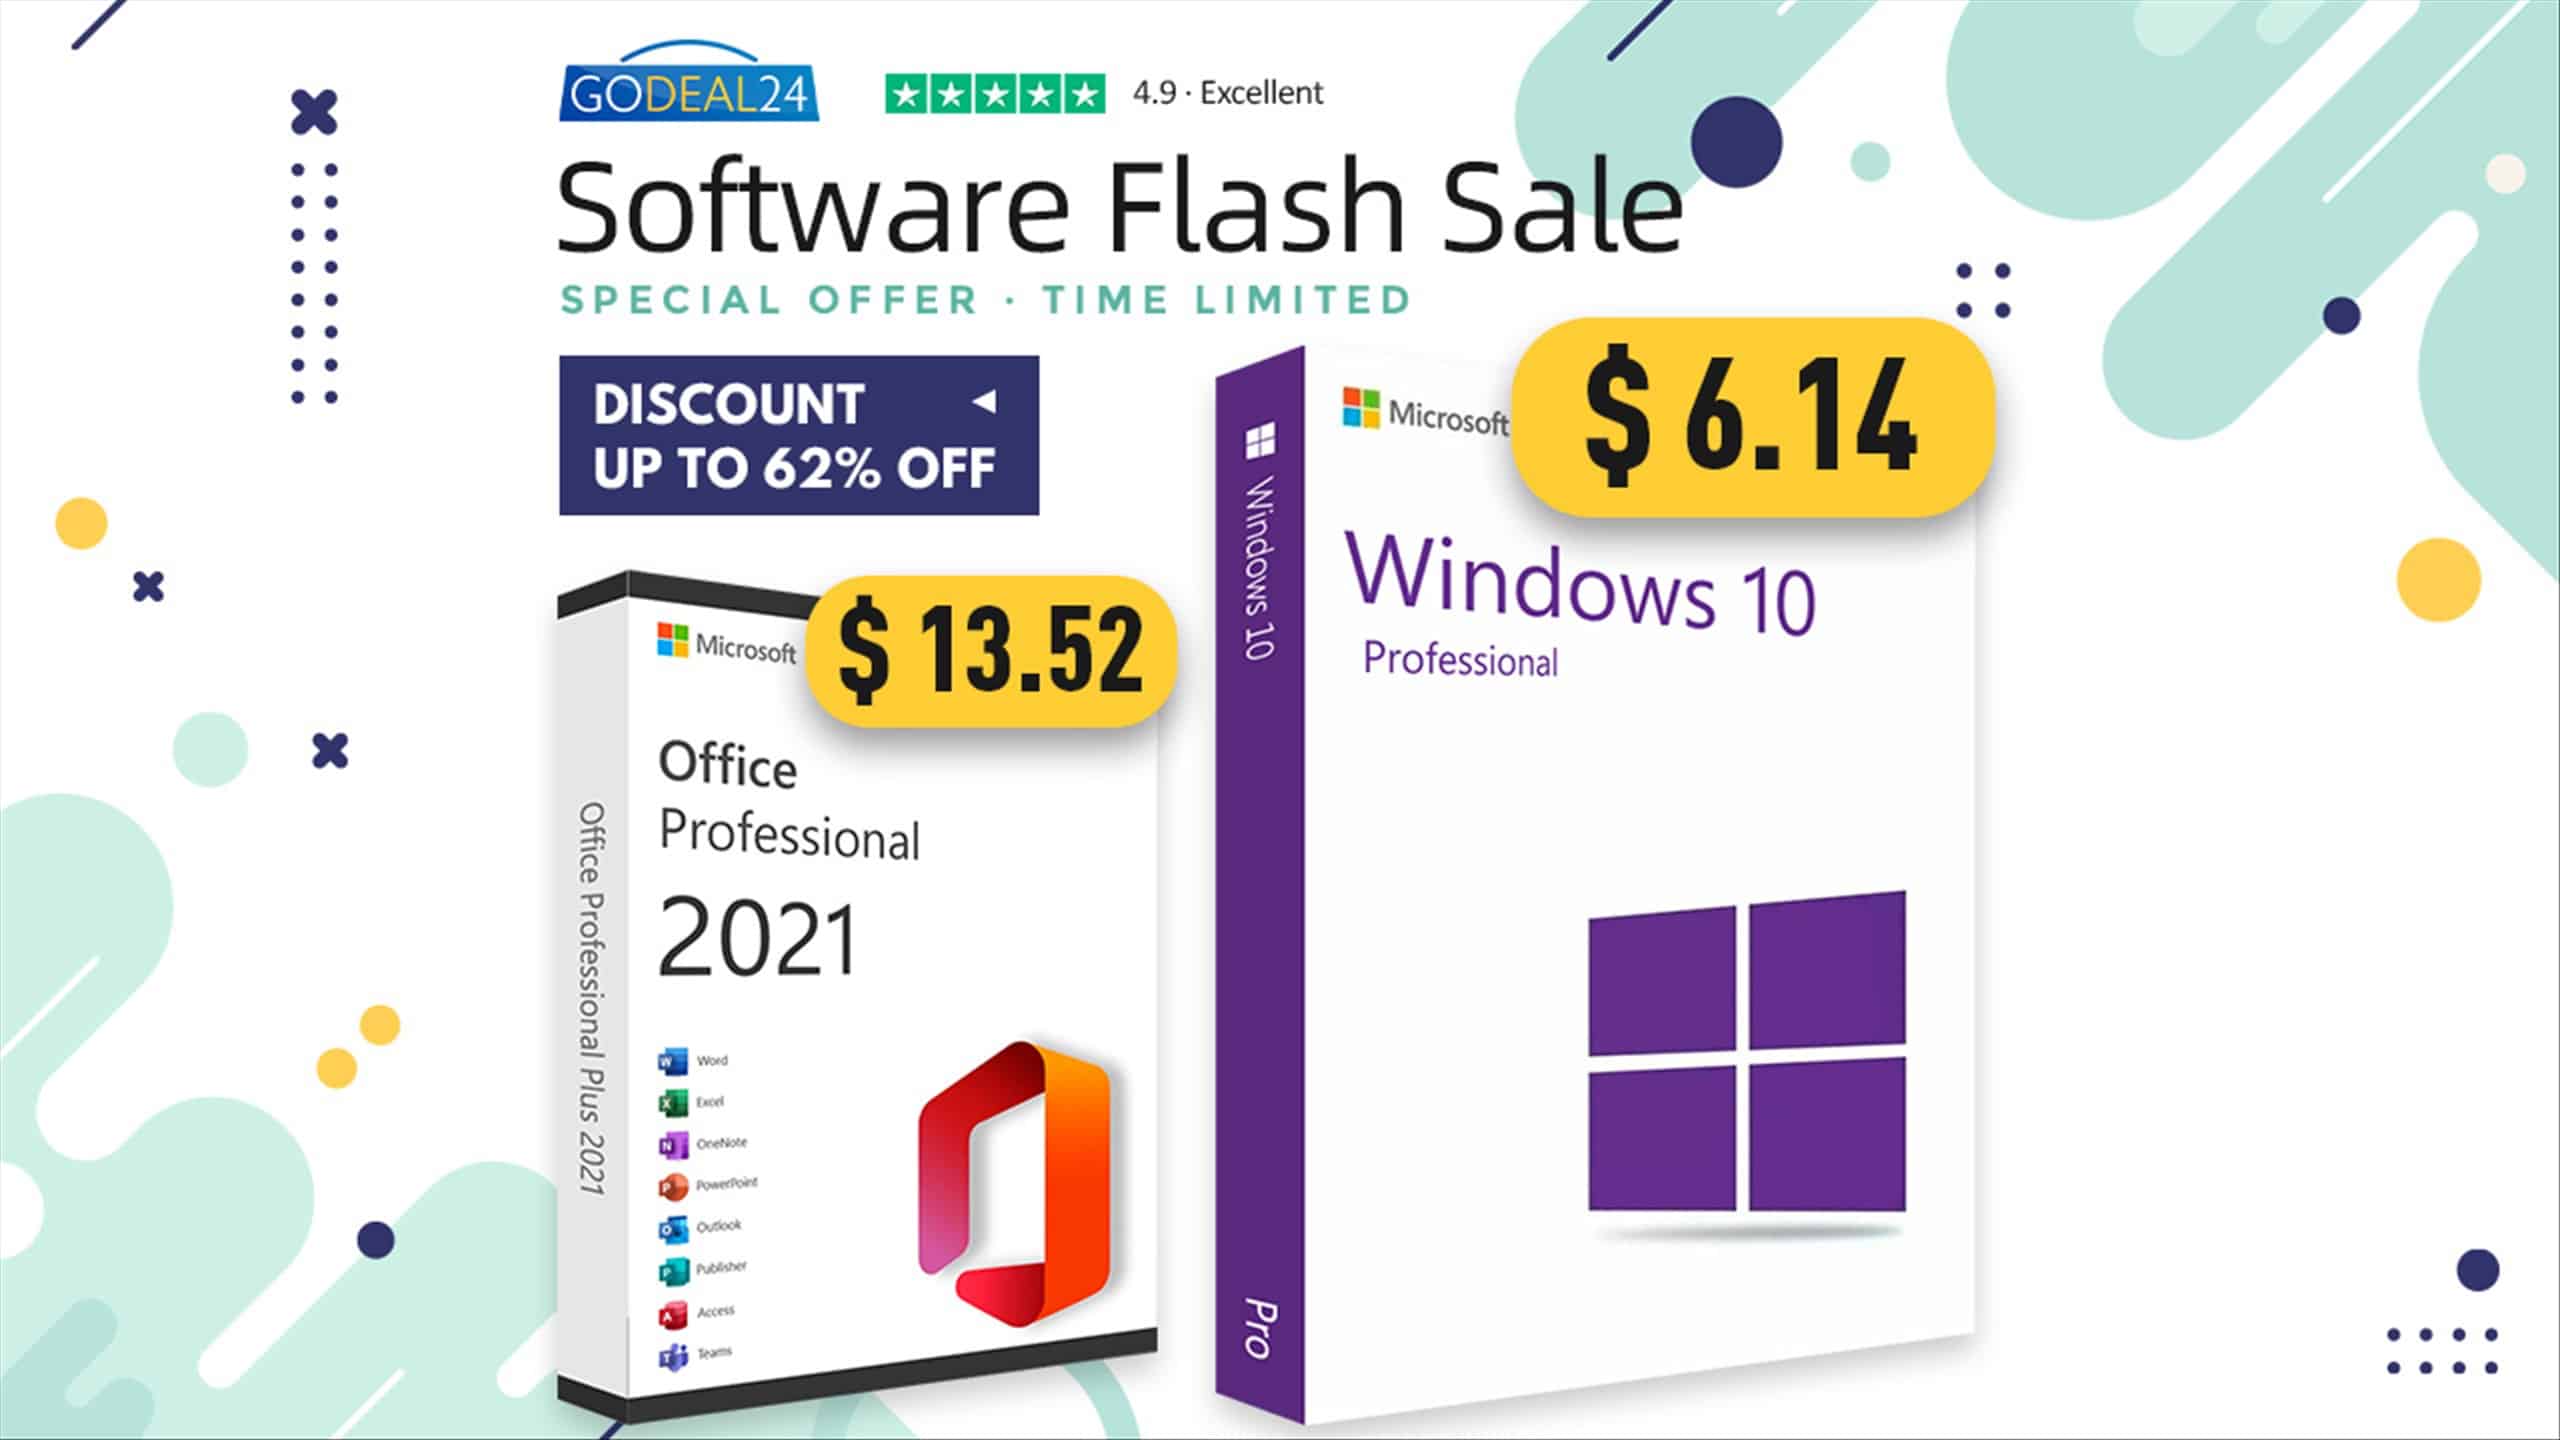 Get your genuine Windows 10 here, starting from $6.14! Office 2021 as low as $13.52 at Godeal24 Software Sale!